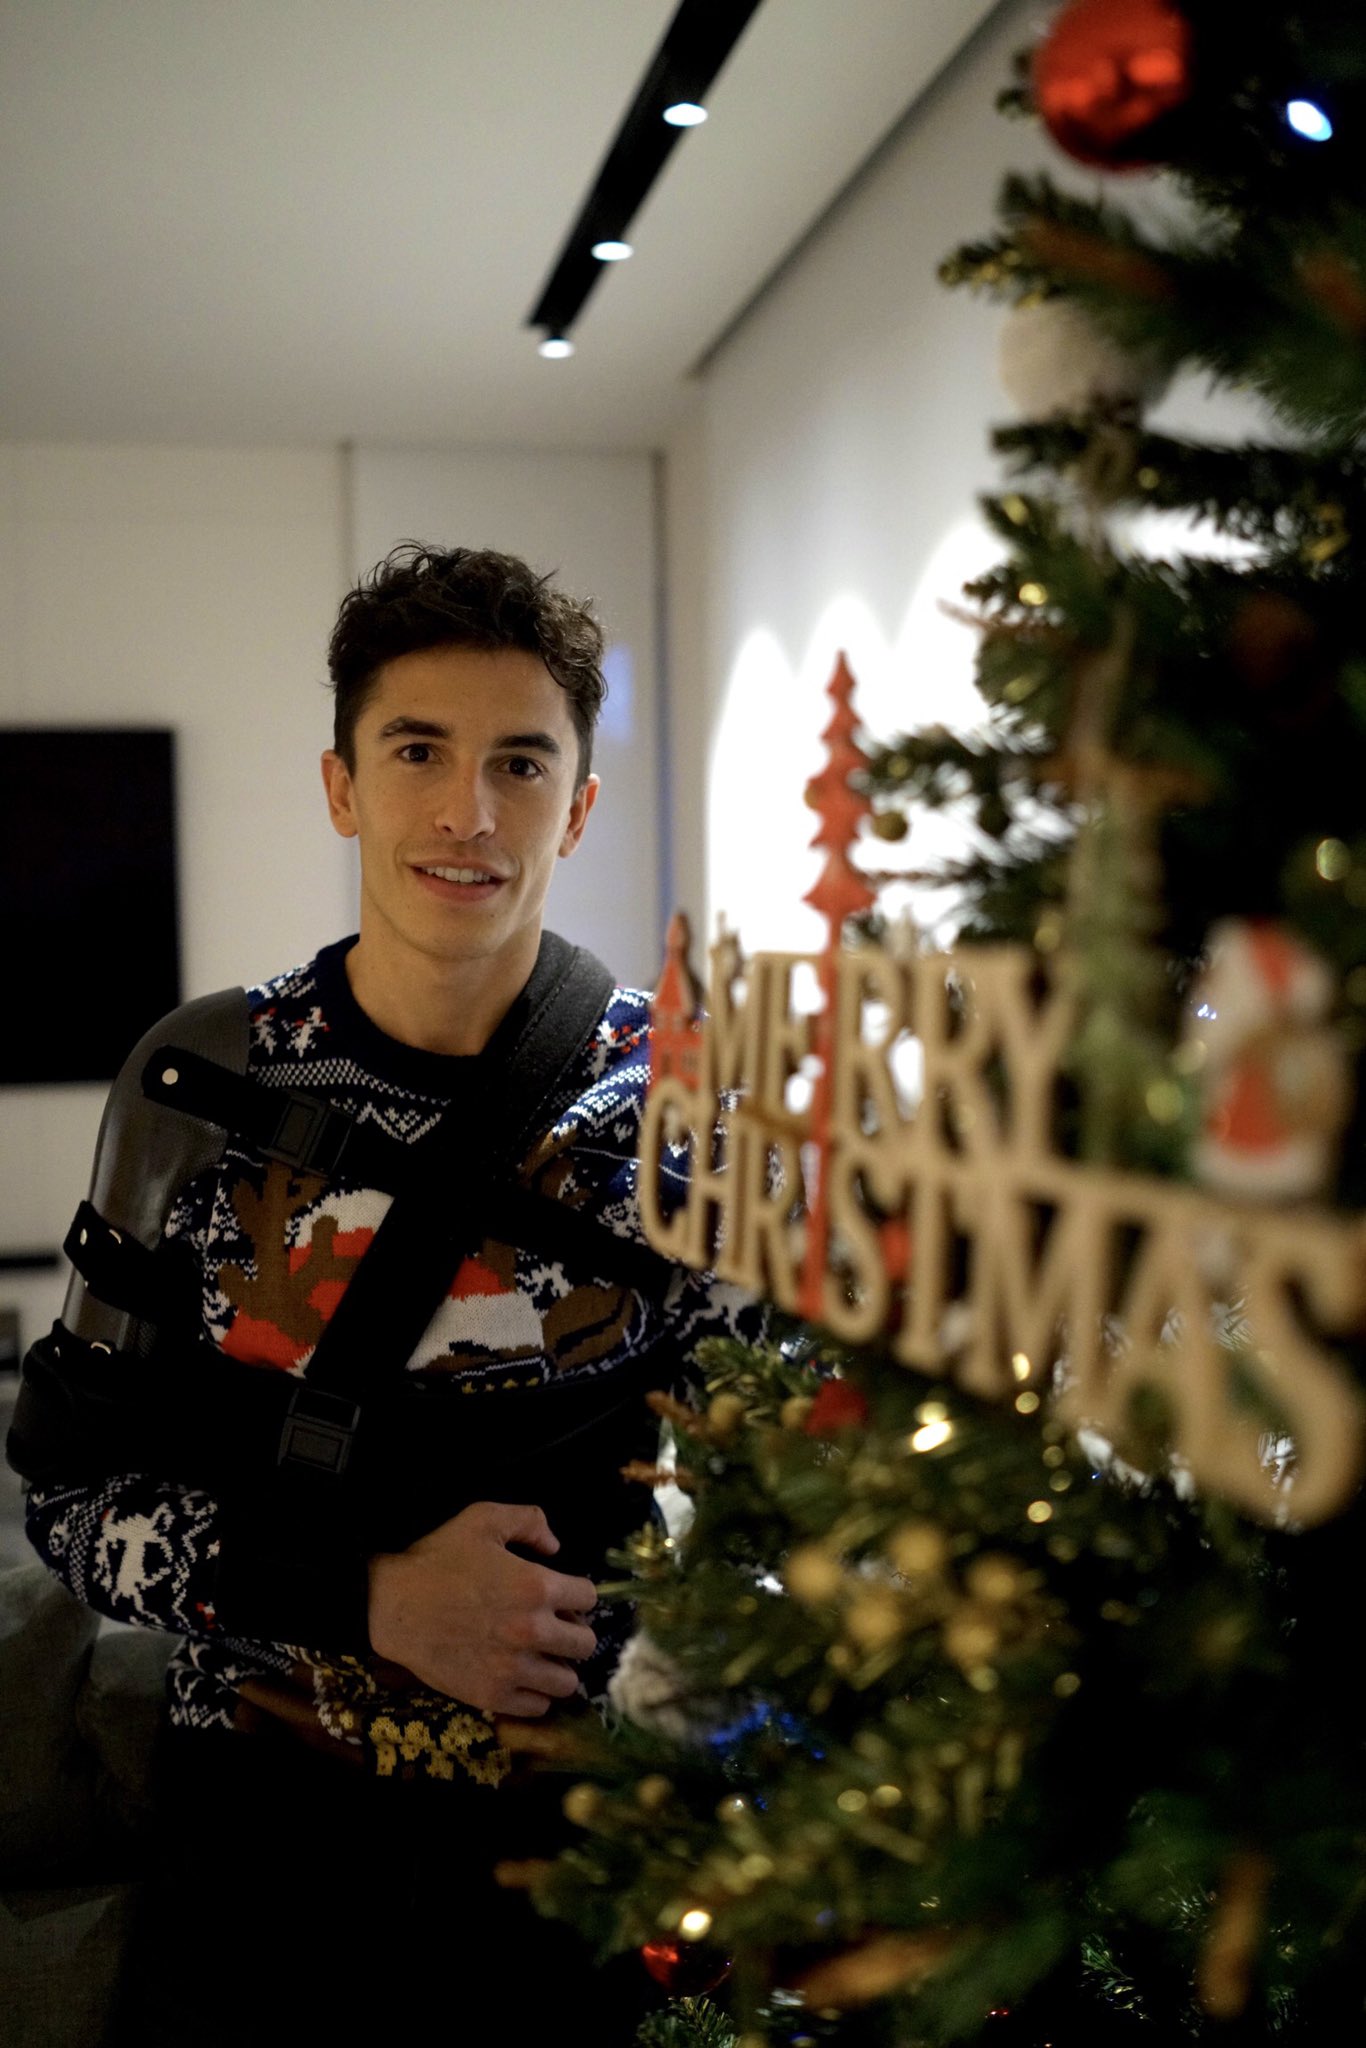 Marc Marquez shows up again with his armor and it doesn't bode well...